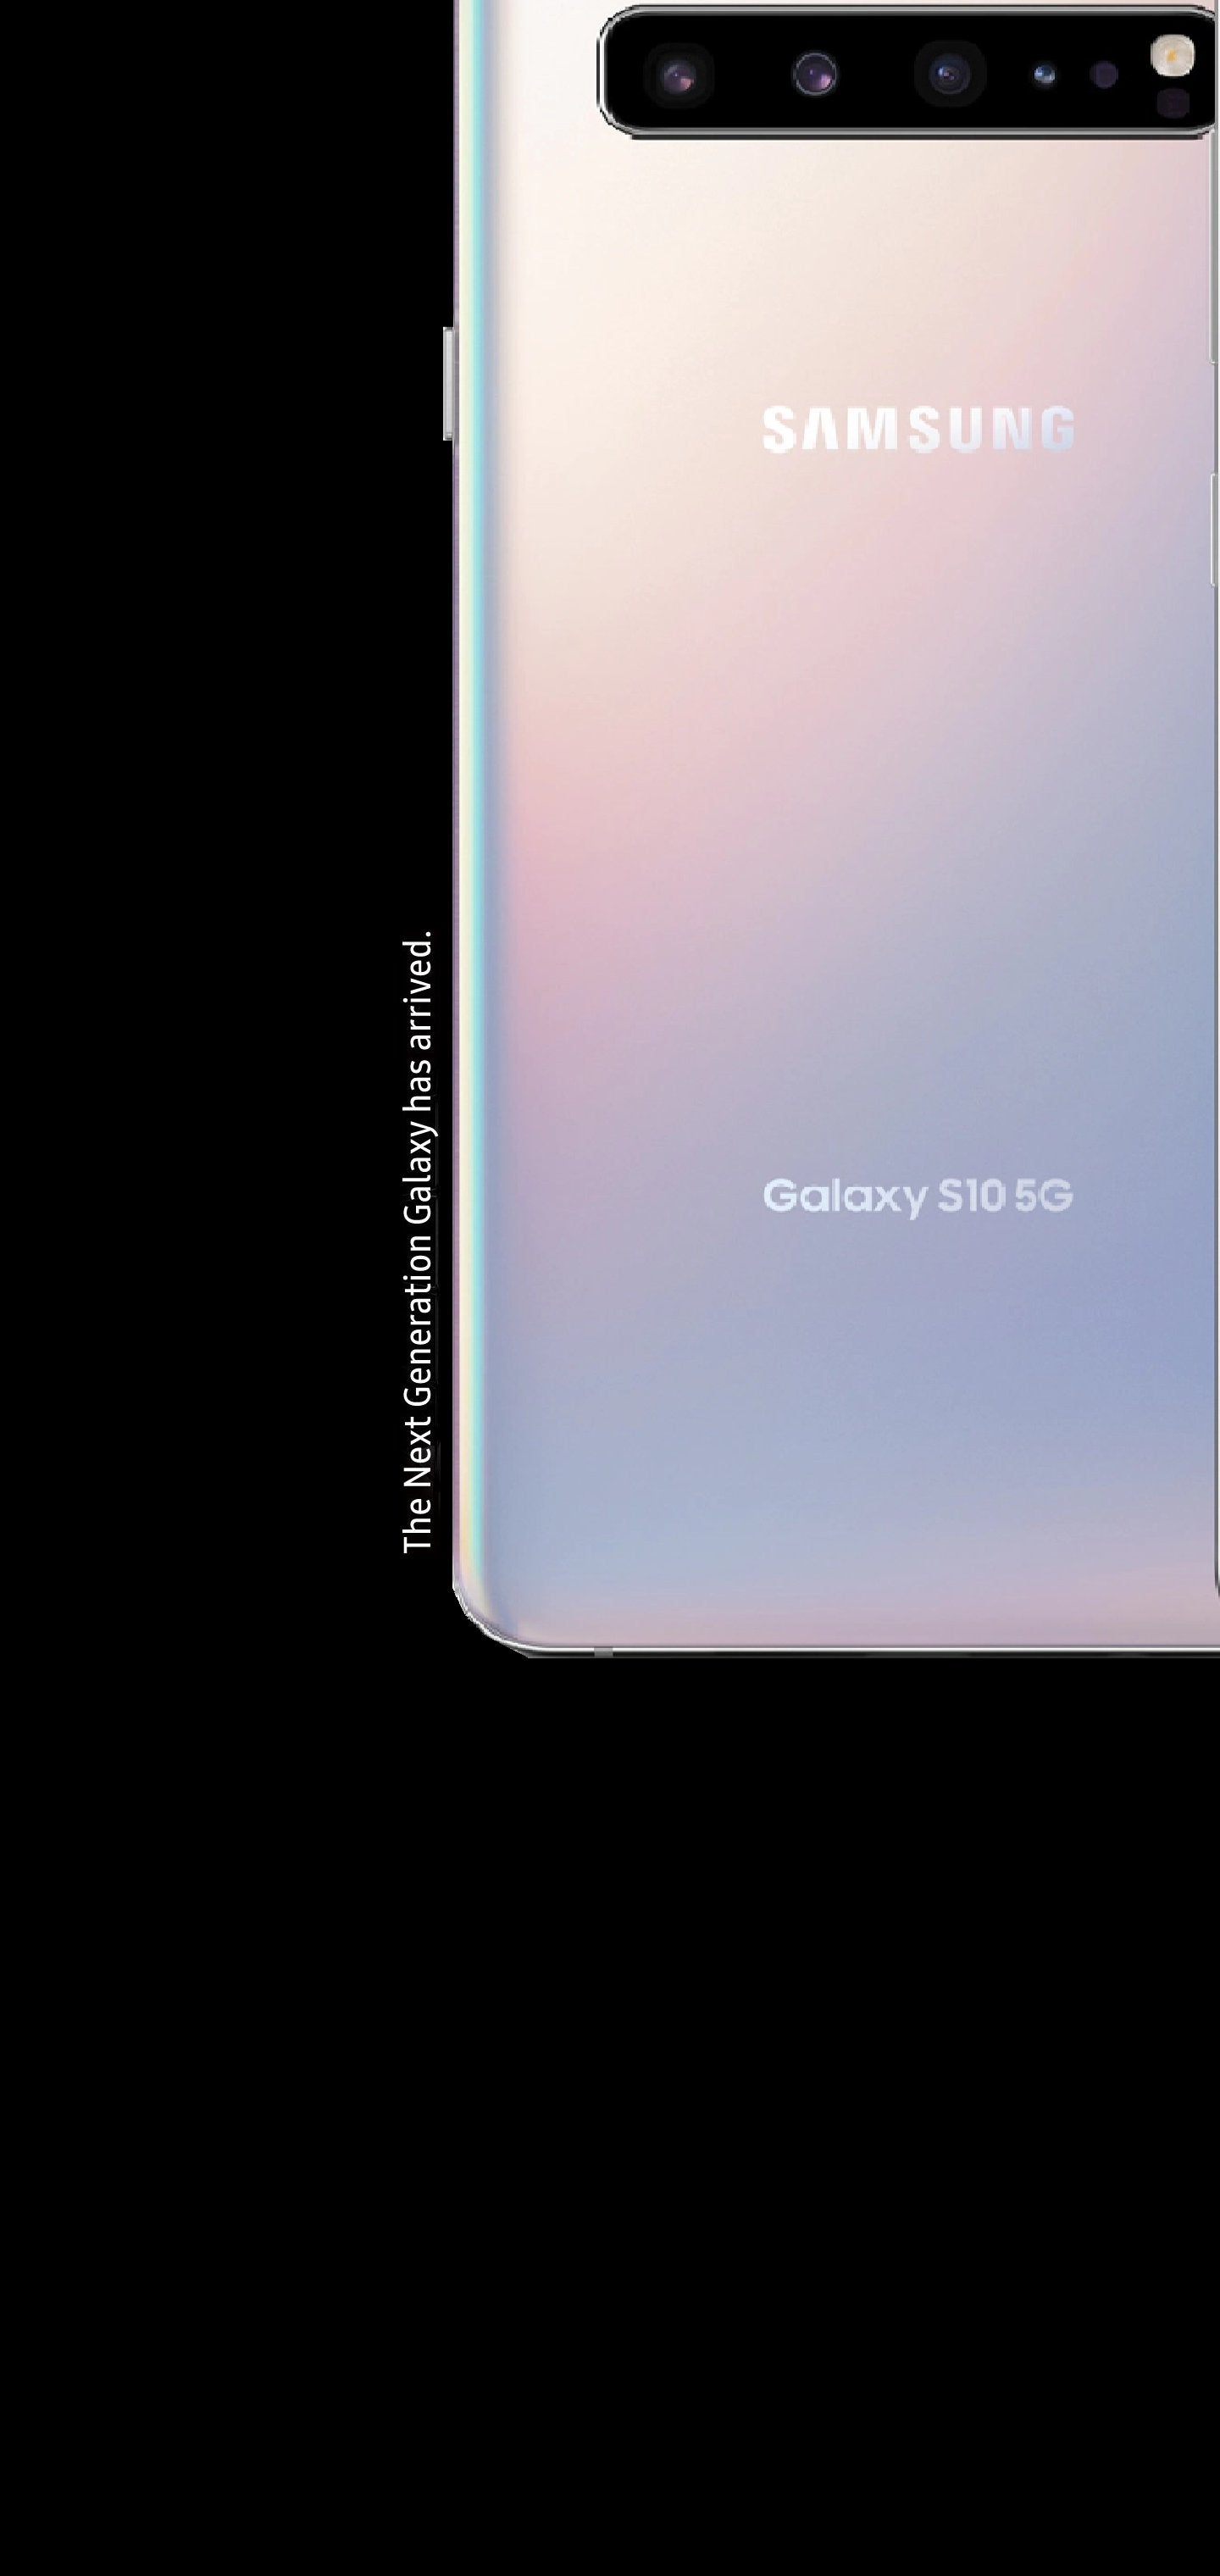 Galaxy S10 5G Wallpapers